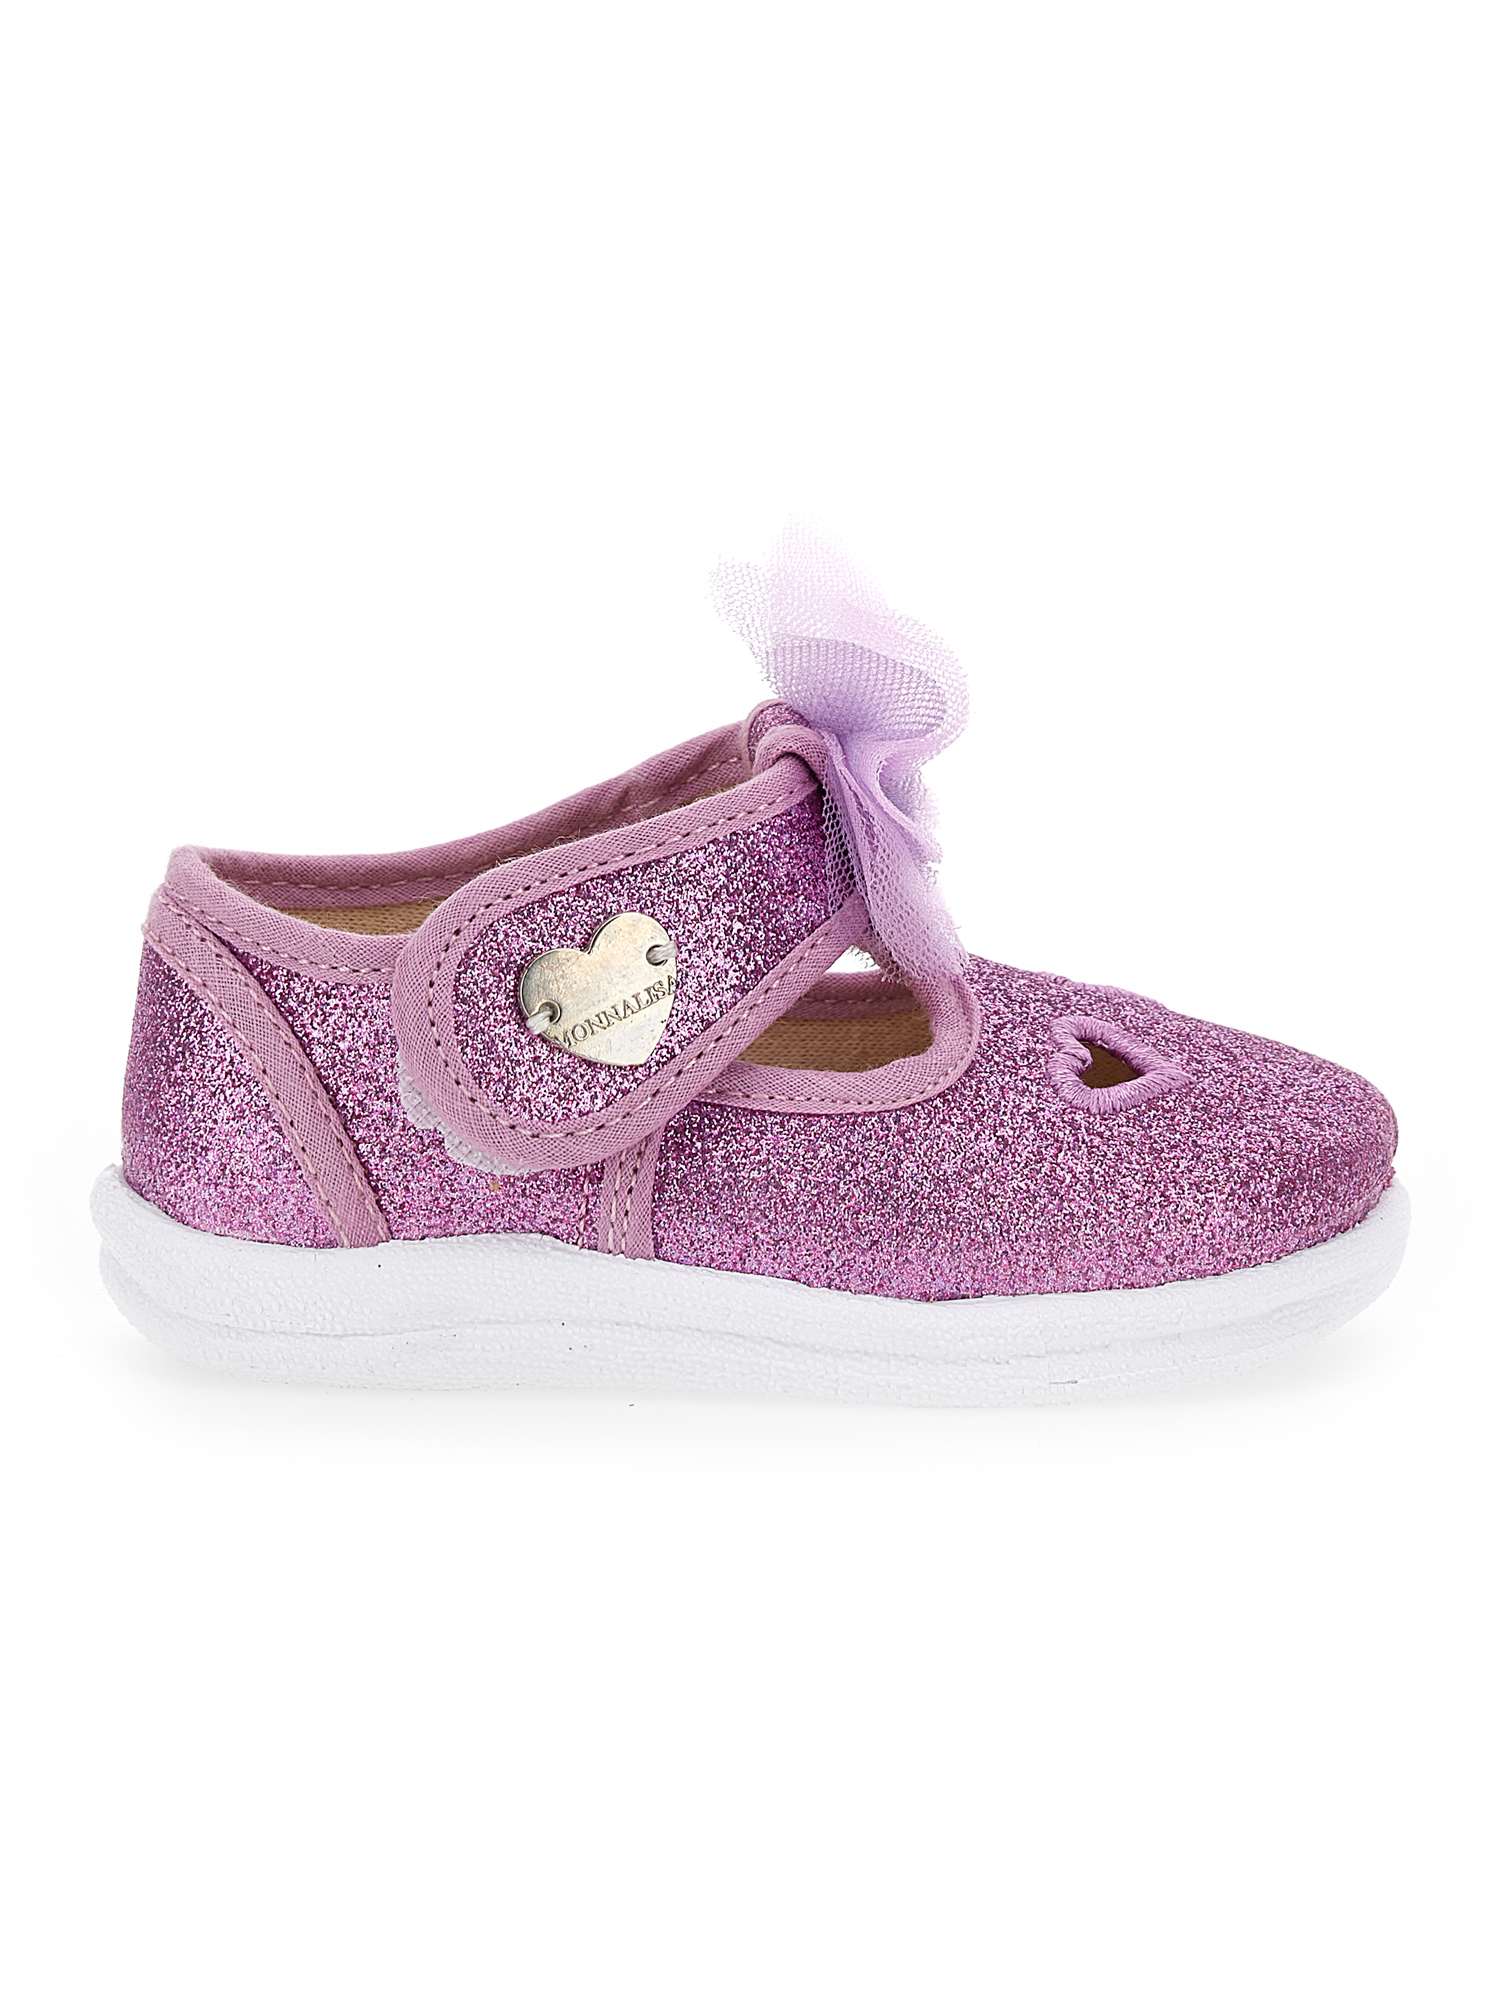 Monnalisa Glitter Sandals With Butterfly In Glitter Wisteria